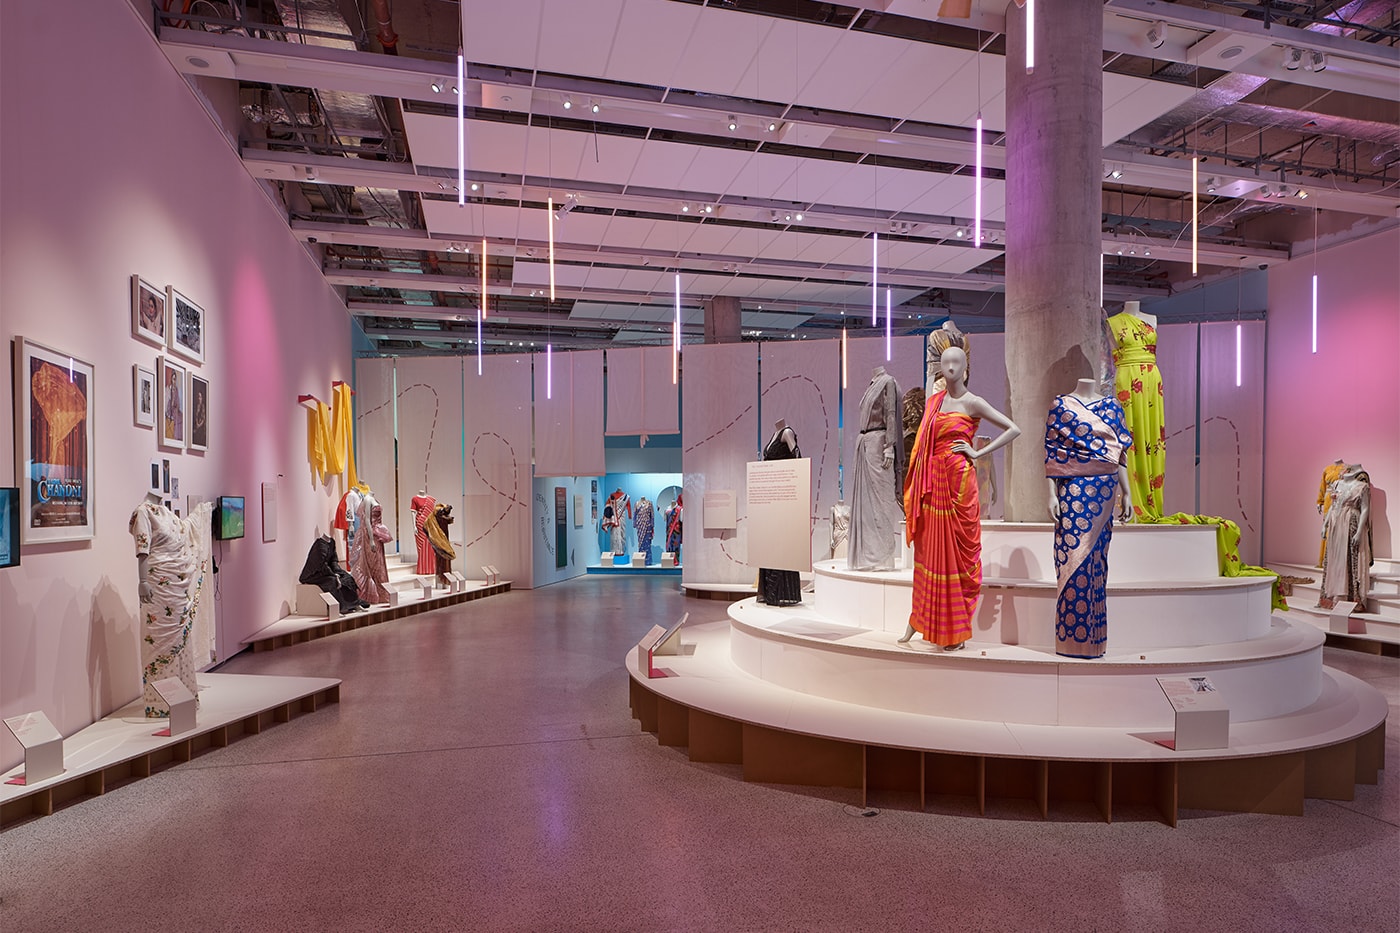 The Sari's Historical and Contemporary Significance Explored at London's Design Museum